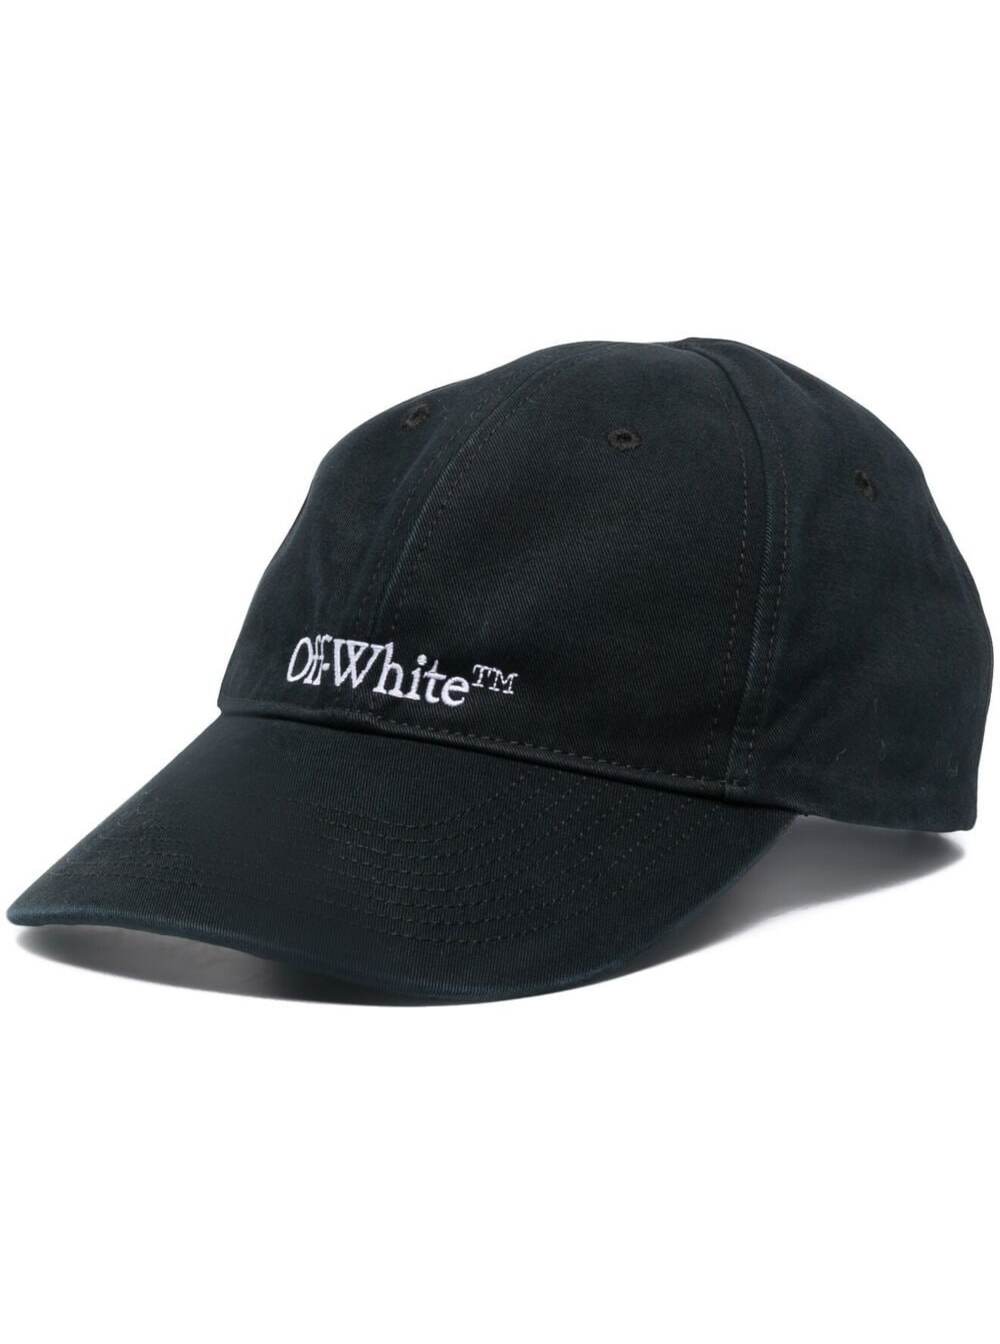 OFF-WHITE BLACK BASEBALL CAP WITH CONTRASTING LOGO EMBROIDERY IN COTTON WOMAN